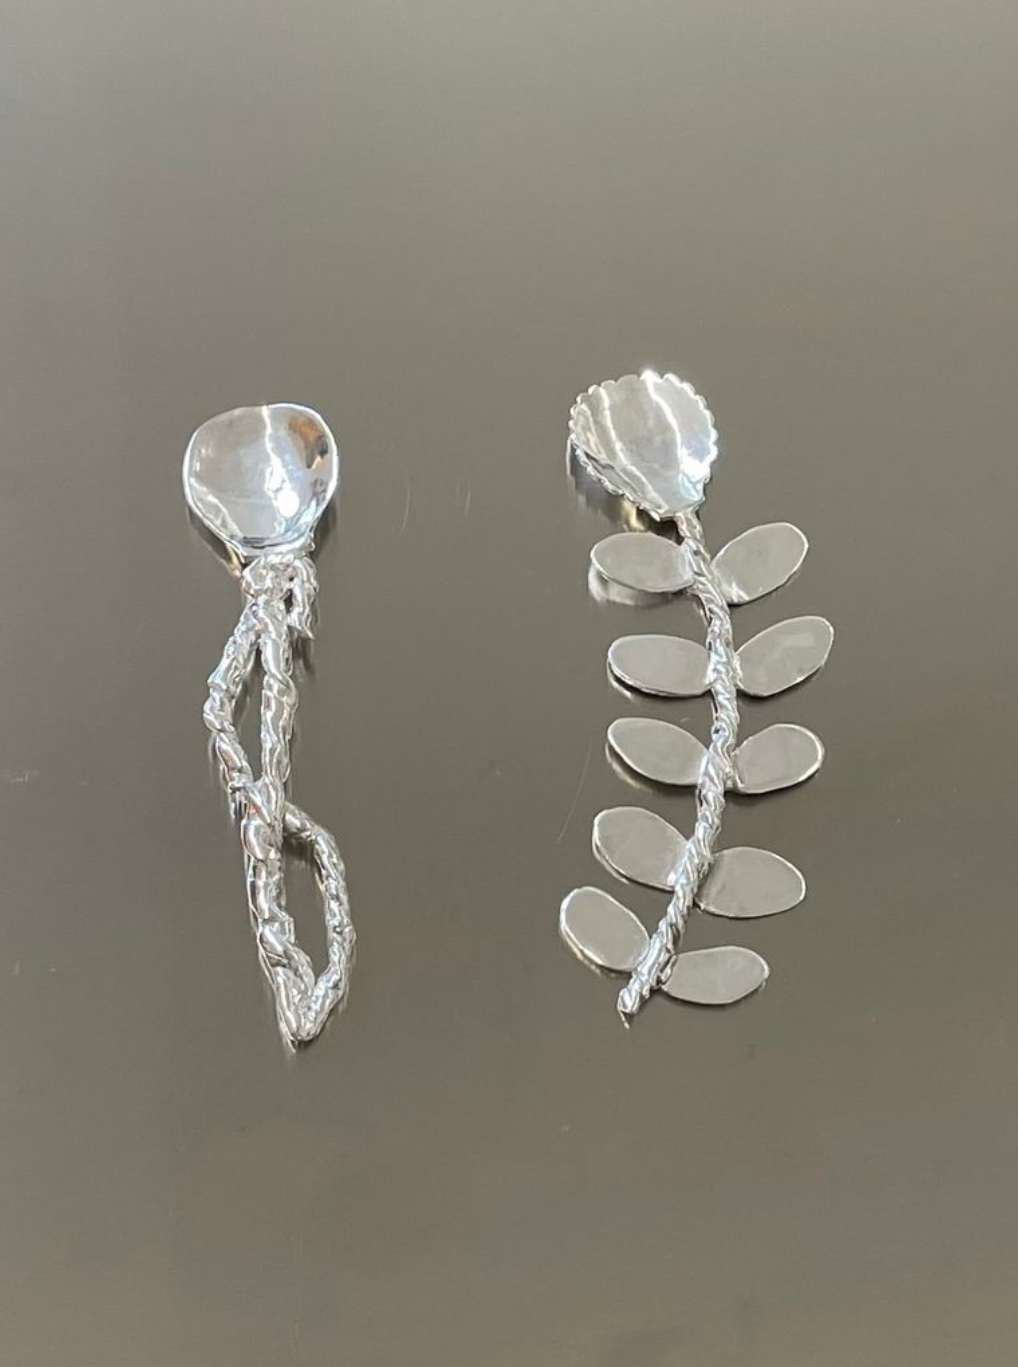 Two handcrafted Corali silver earrings with an organic design, featuring a textured twist and multiple leaf-like dangling elements, displayed against a grey background.